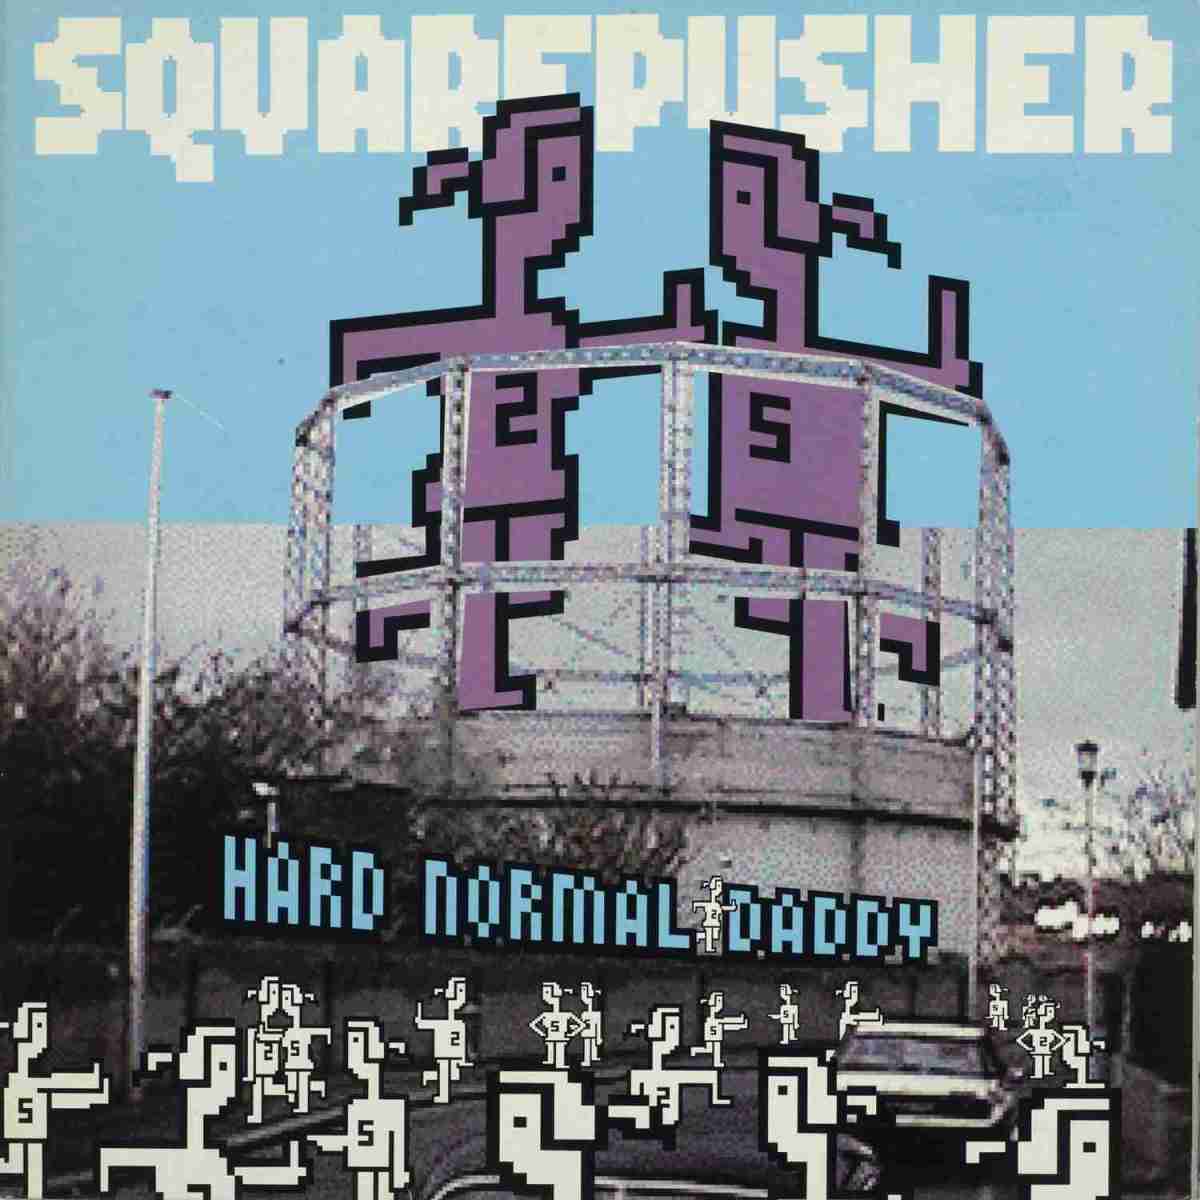 Hard Normal Daddy by Squarepusher